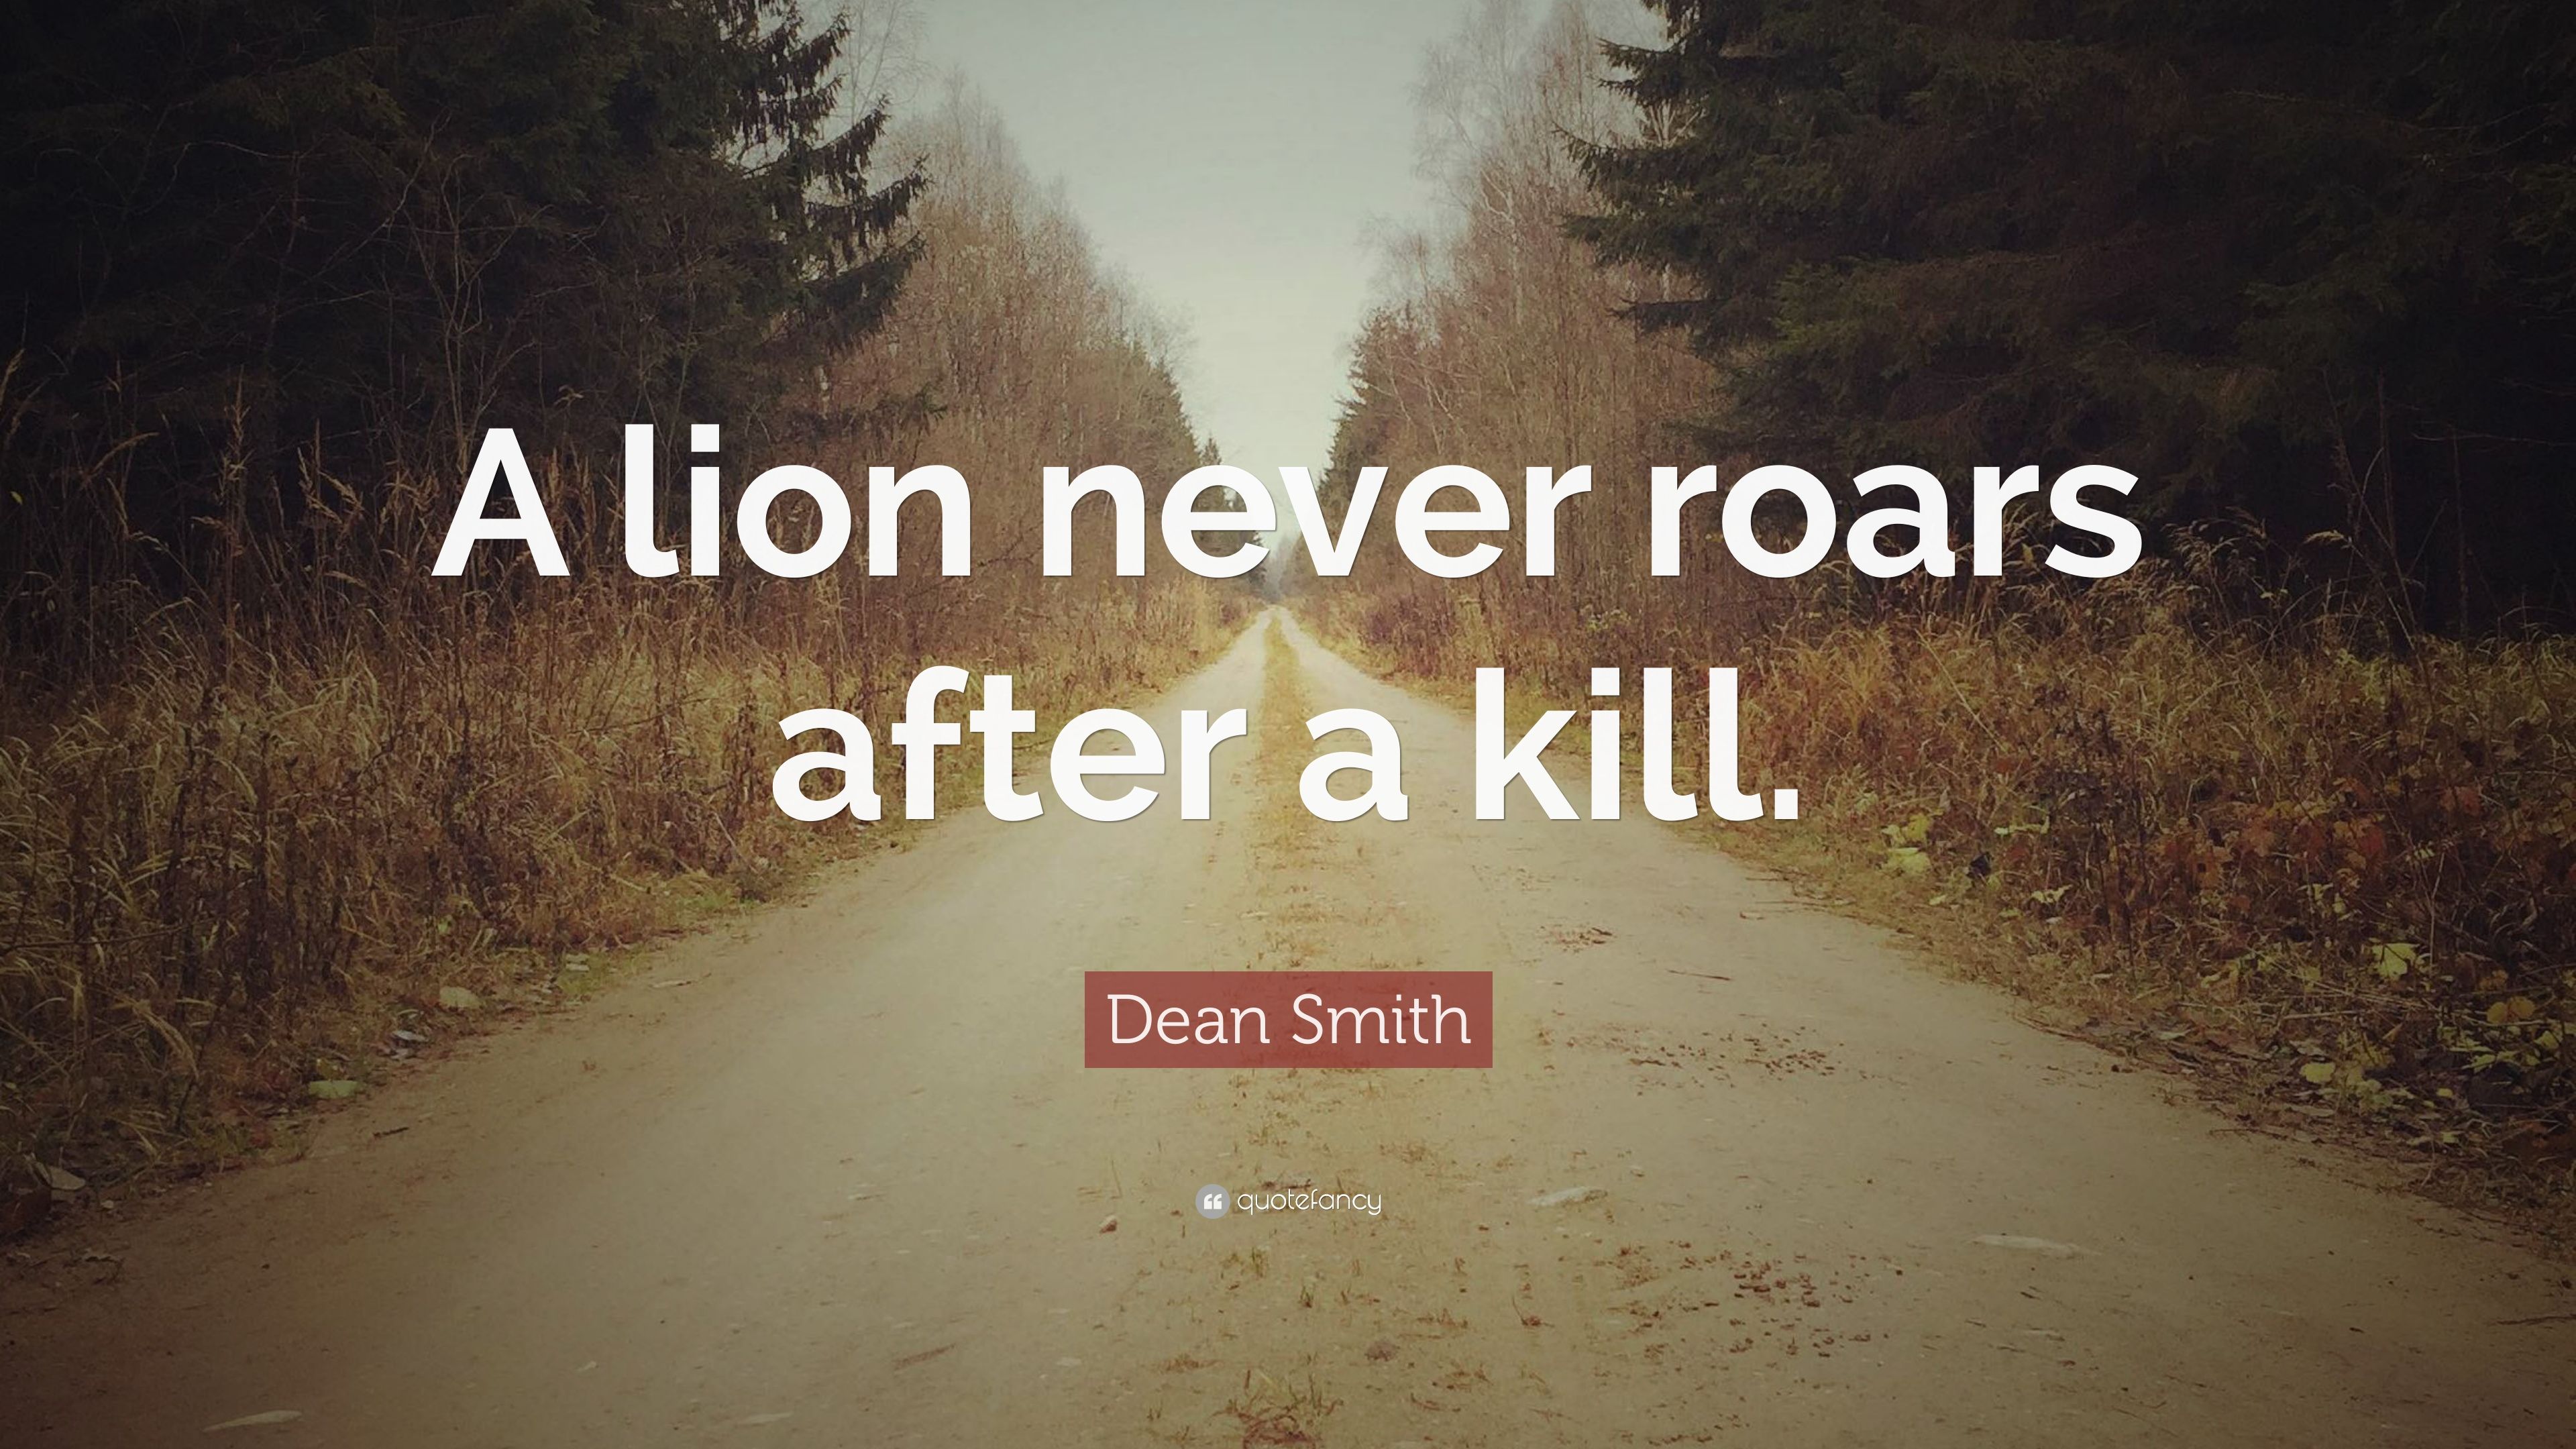 Dean Smith Quote: “A lion never roars after a kill.” 12